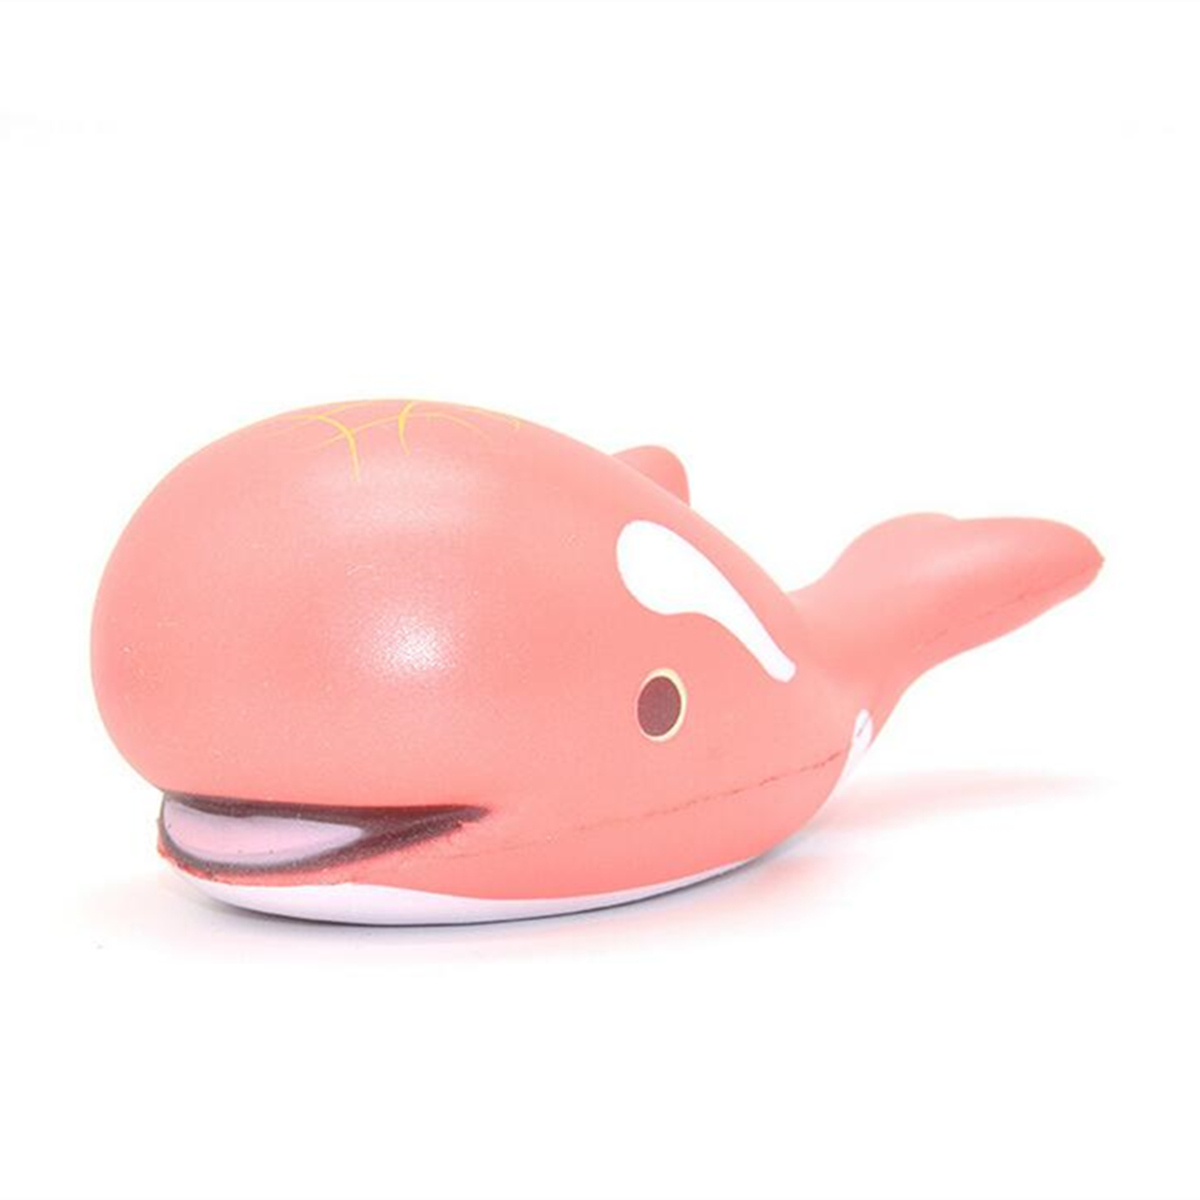 15cm-Whale-Squishy-Slow-Rising-Pressure-Release-Soft-Toy-With-Keychains-for-Iphone-Samsung-Xiaomi-1145805-5